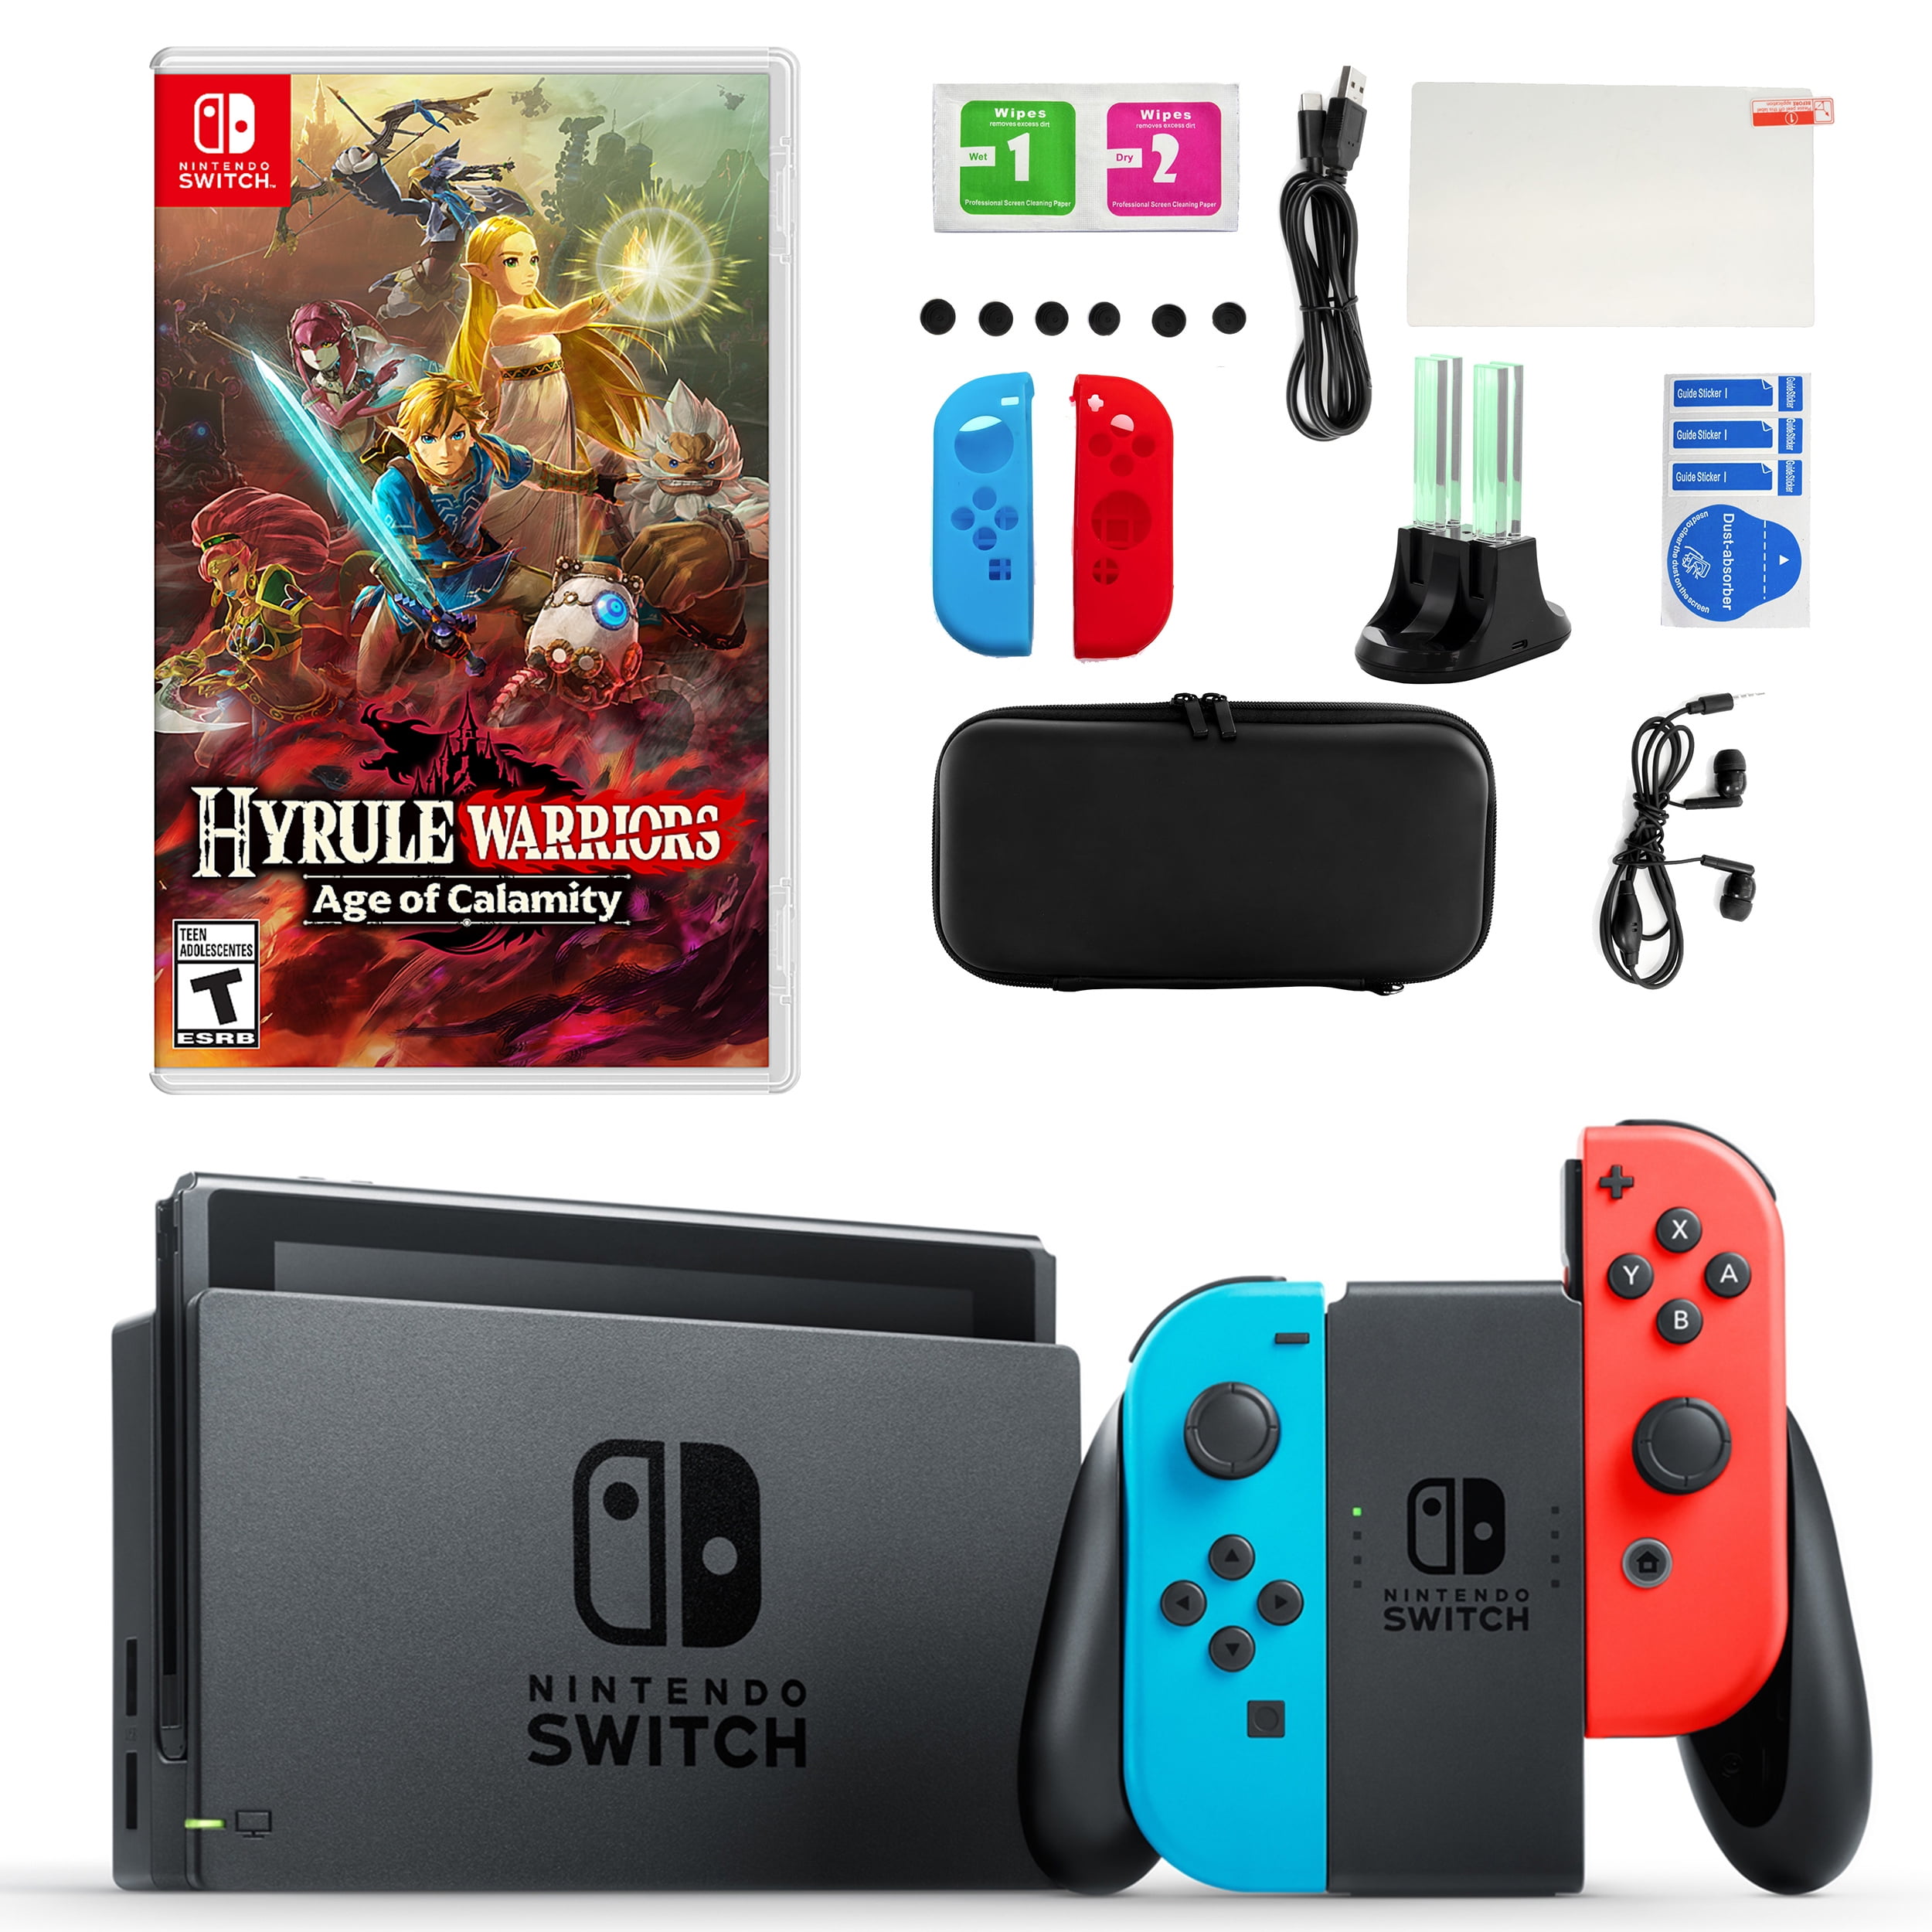 Nintendo Switch in Neon with Hyrule Warriors and Accessory Kit 